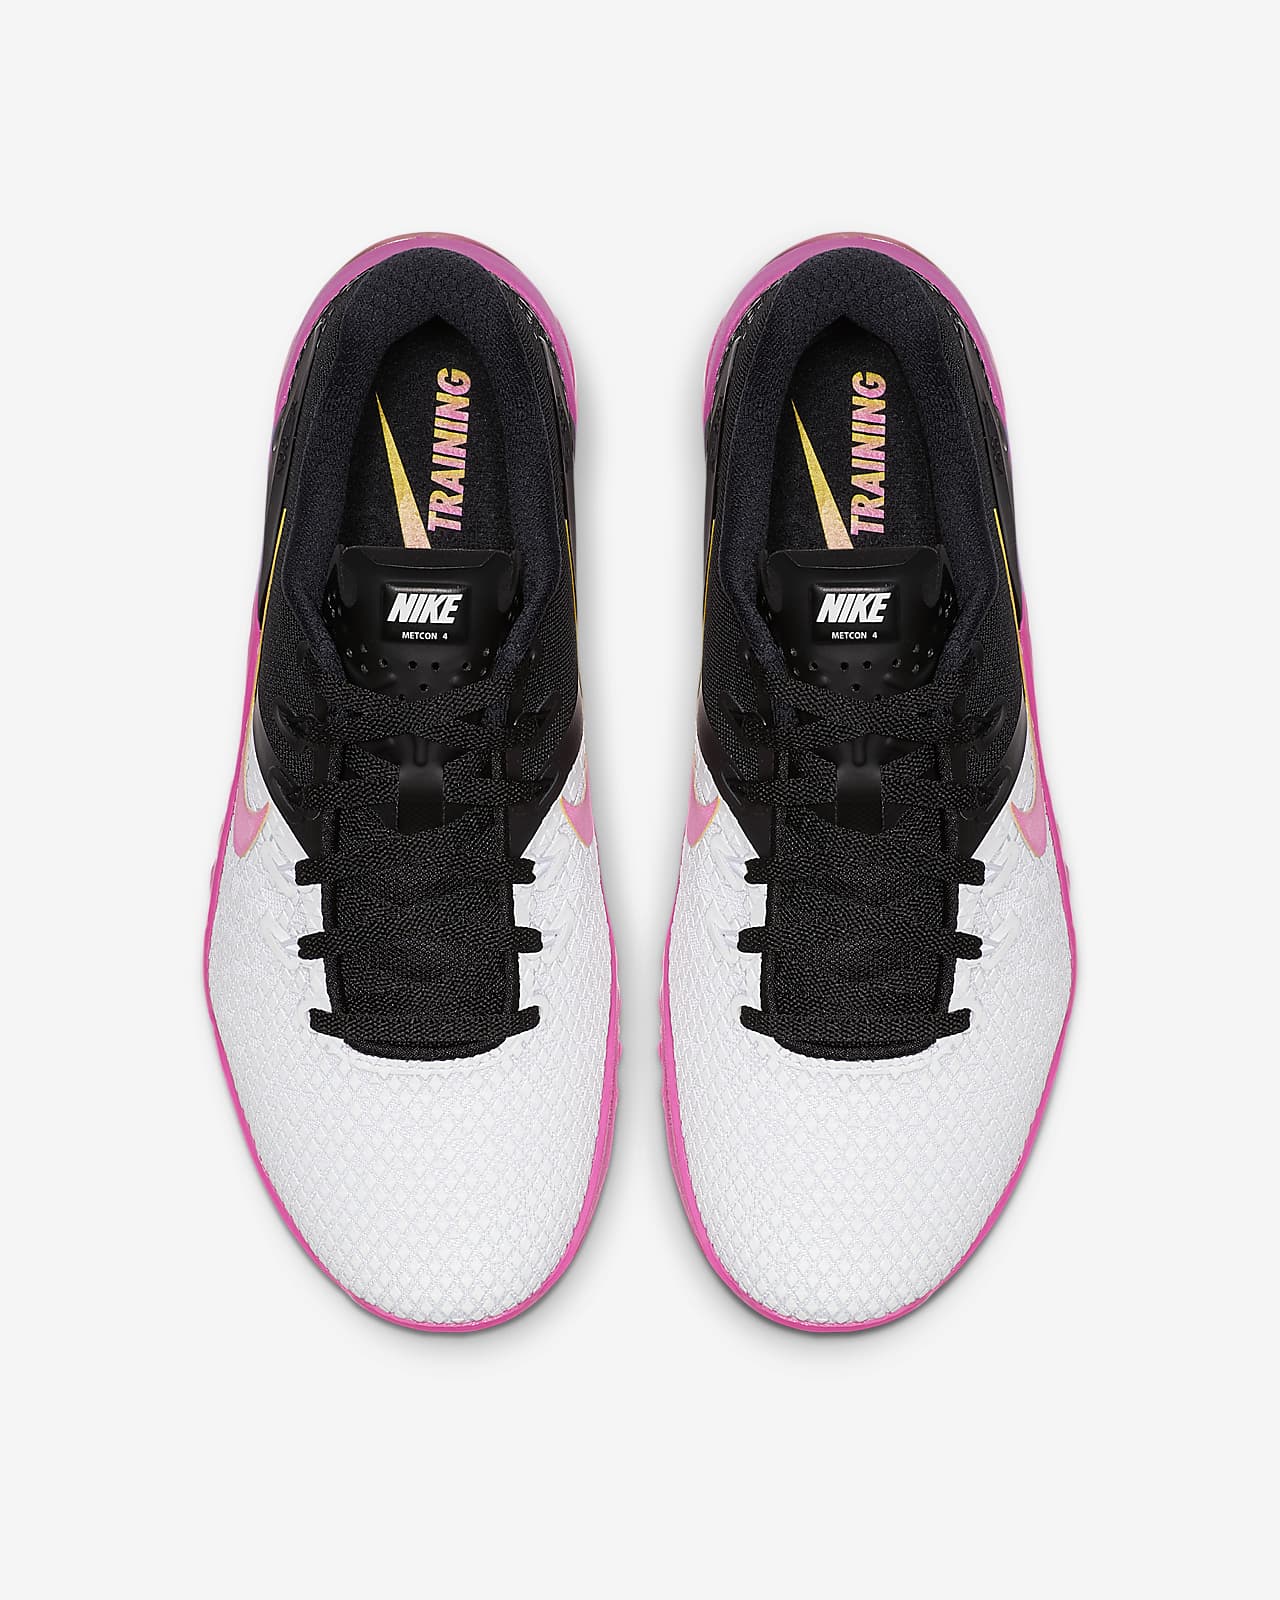 nike metcon 4 mujer chile